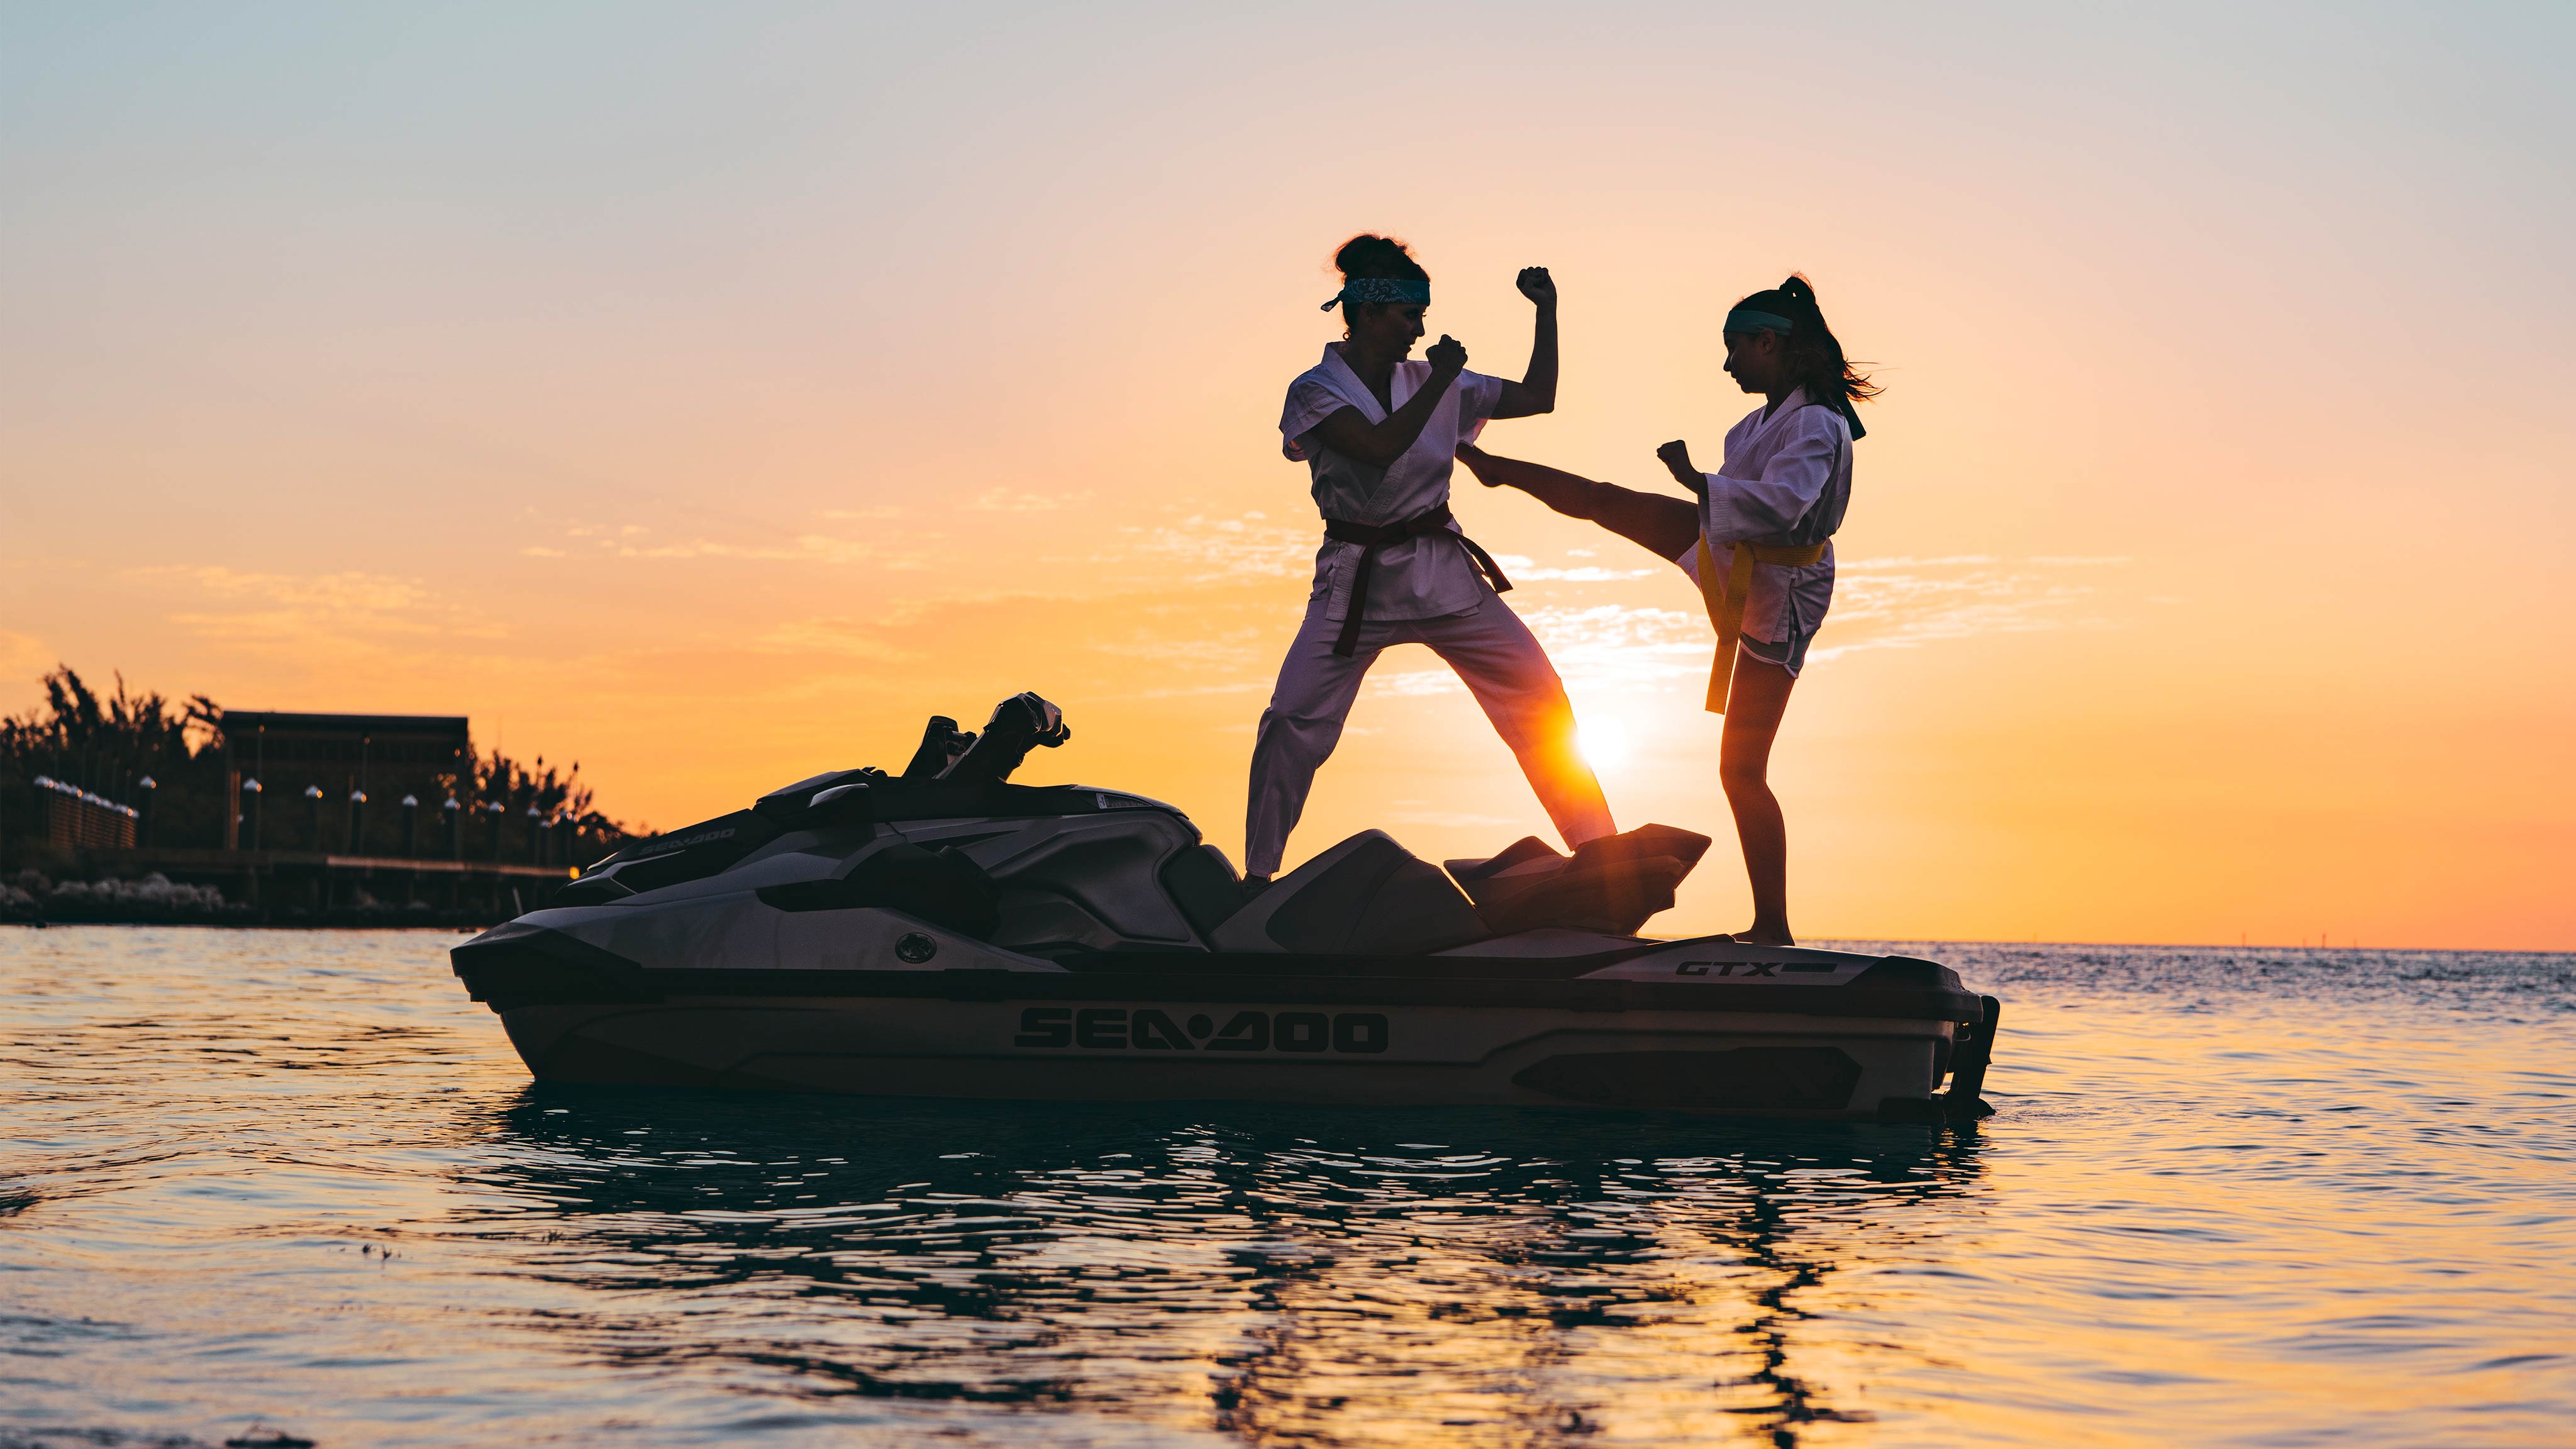 Two women doing karate while standing up on a Sea-Doo GTX Limited